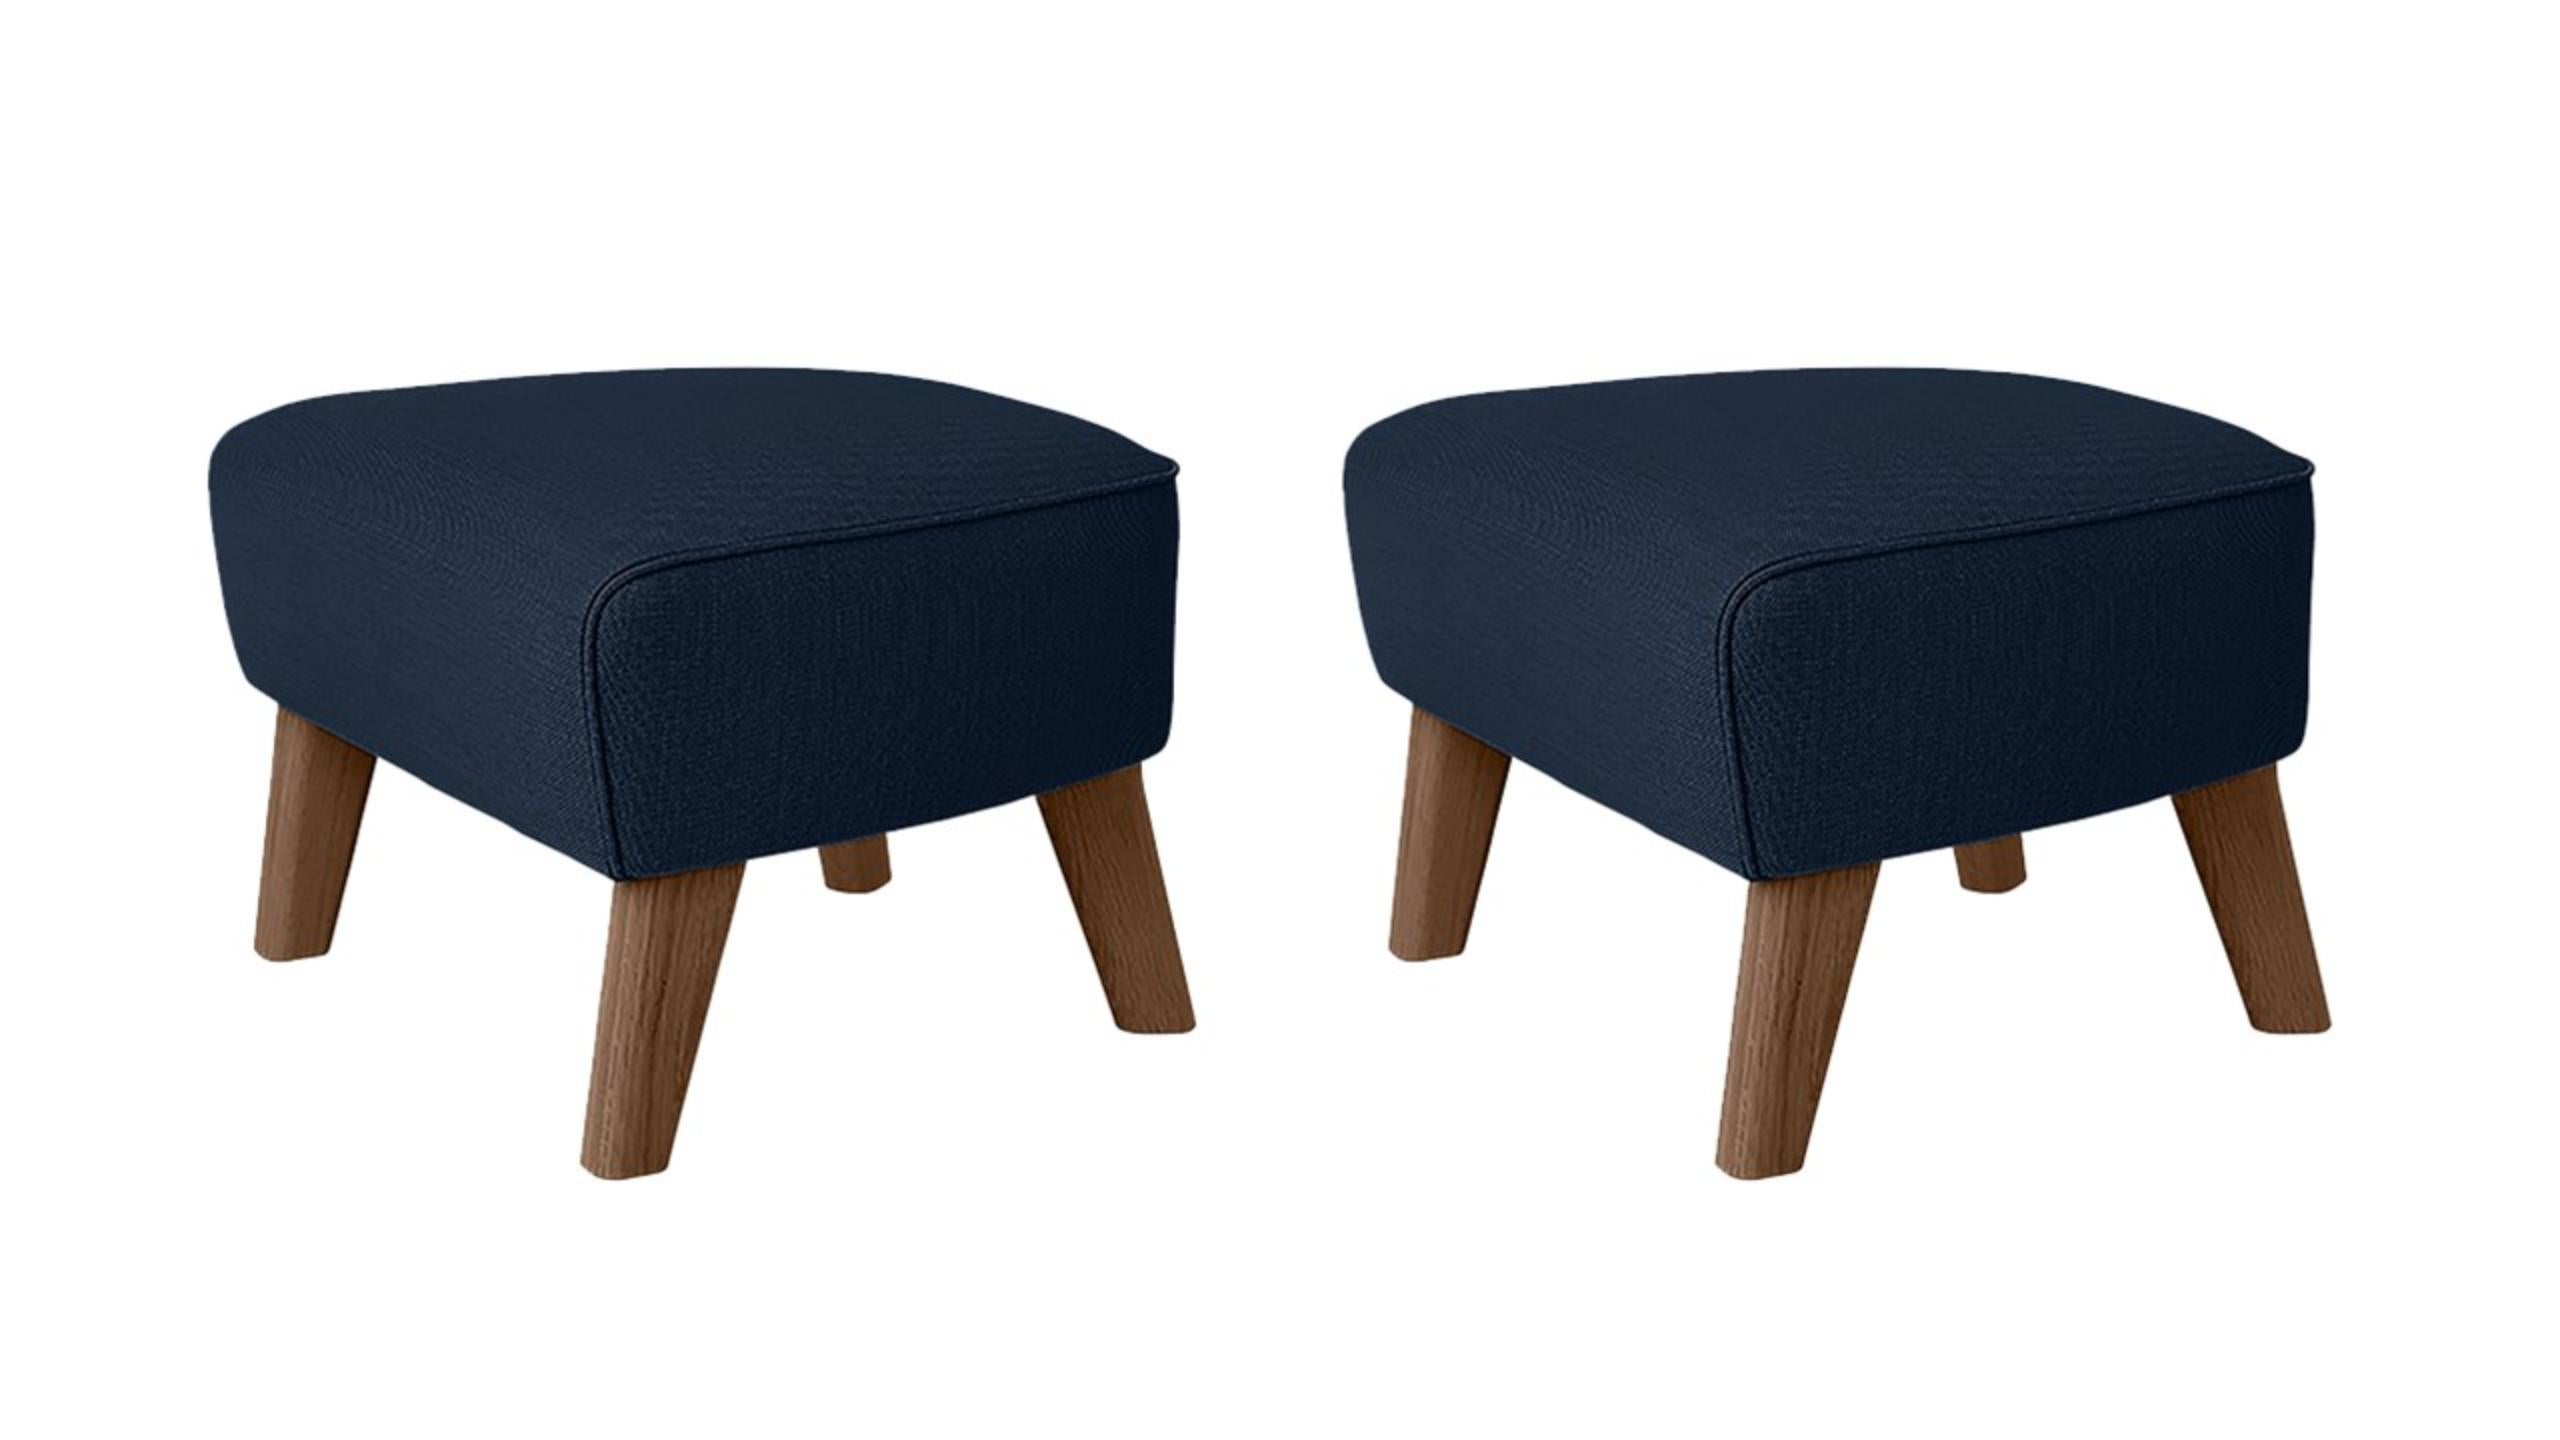 Set of 2 blue and smoked Oak Sahco zero footstool by Lassen
Dimensions: w 56 x d 58 x h 40 cm 
Materials: Textile
Also Available: Other colors available.

The My Own Chair footstool has been designed in the same spirit as Flemming Lassen’s